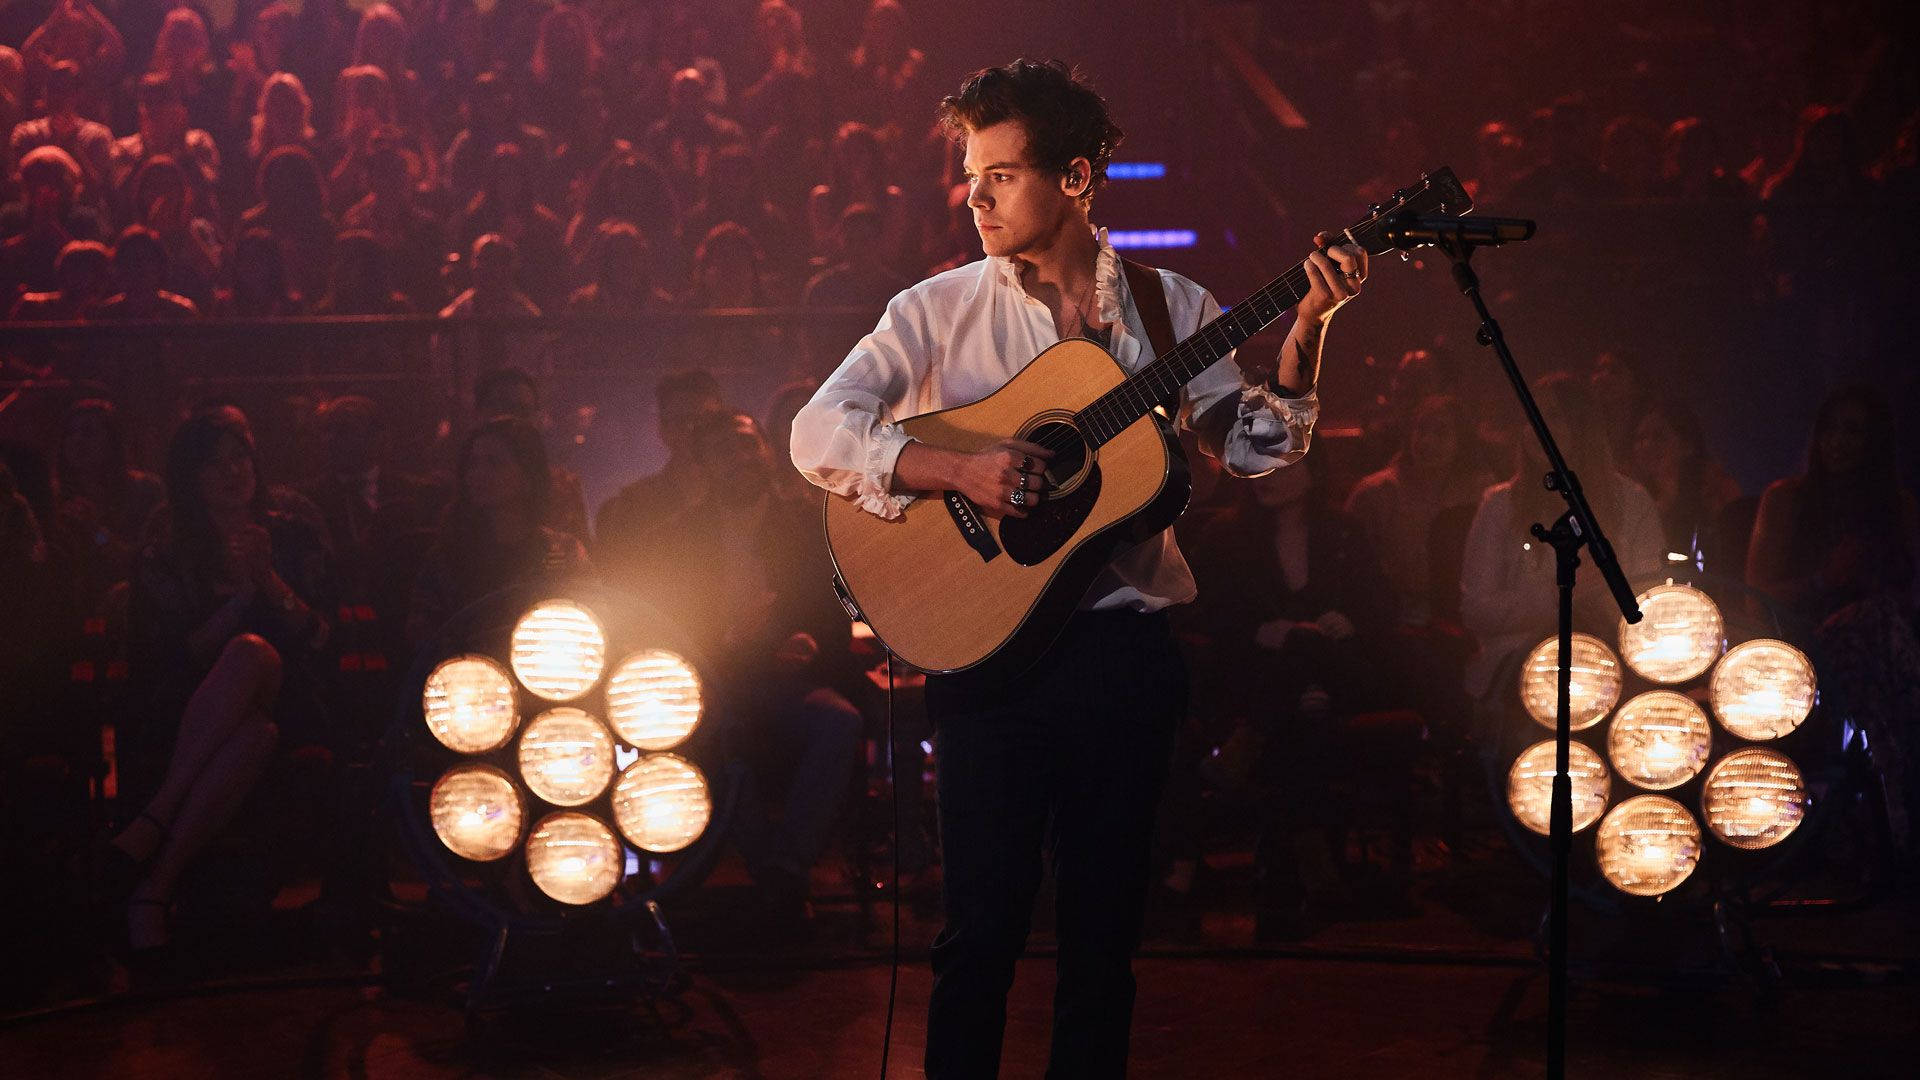 Harry Styles Performance Background